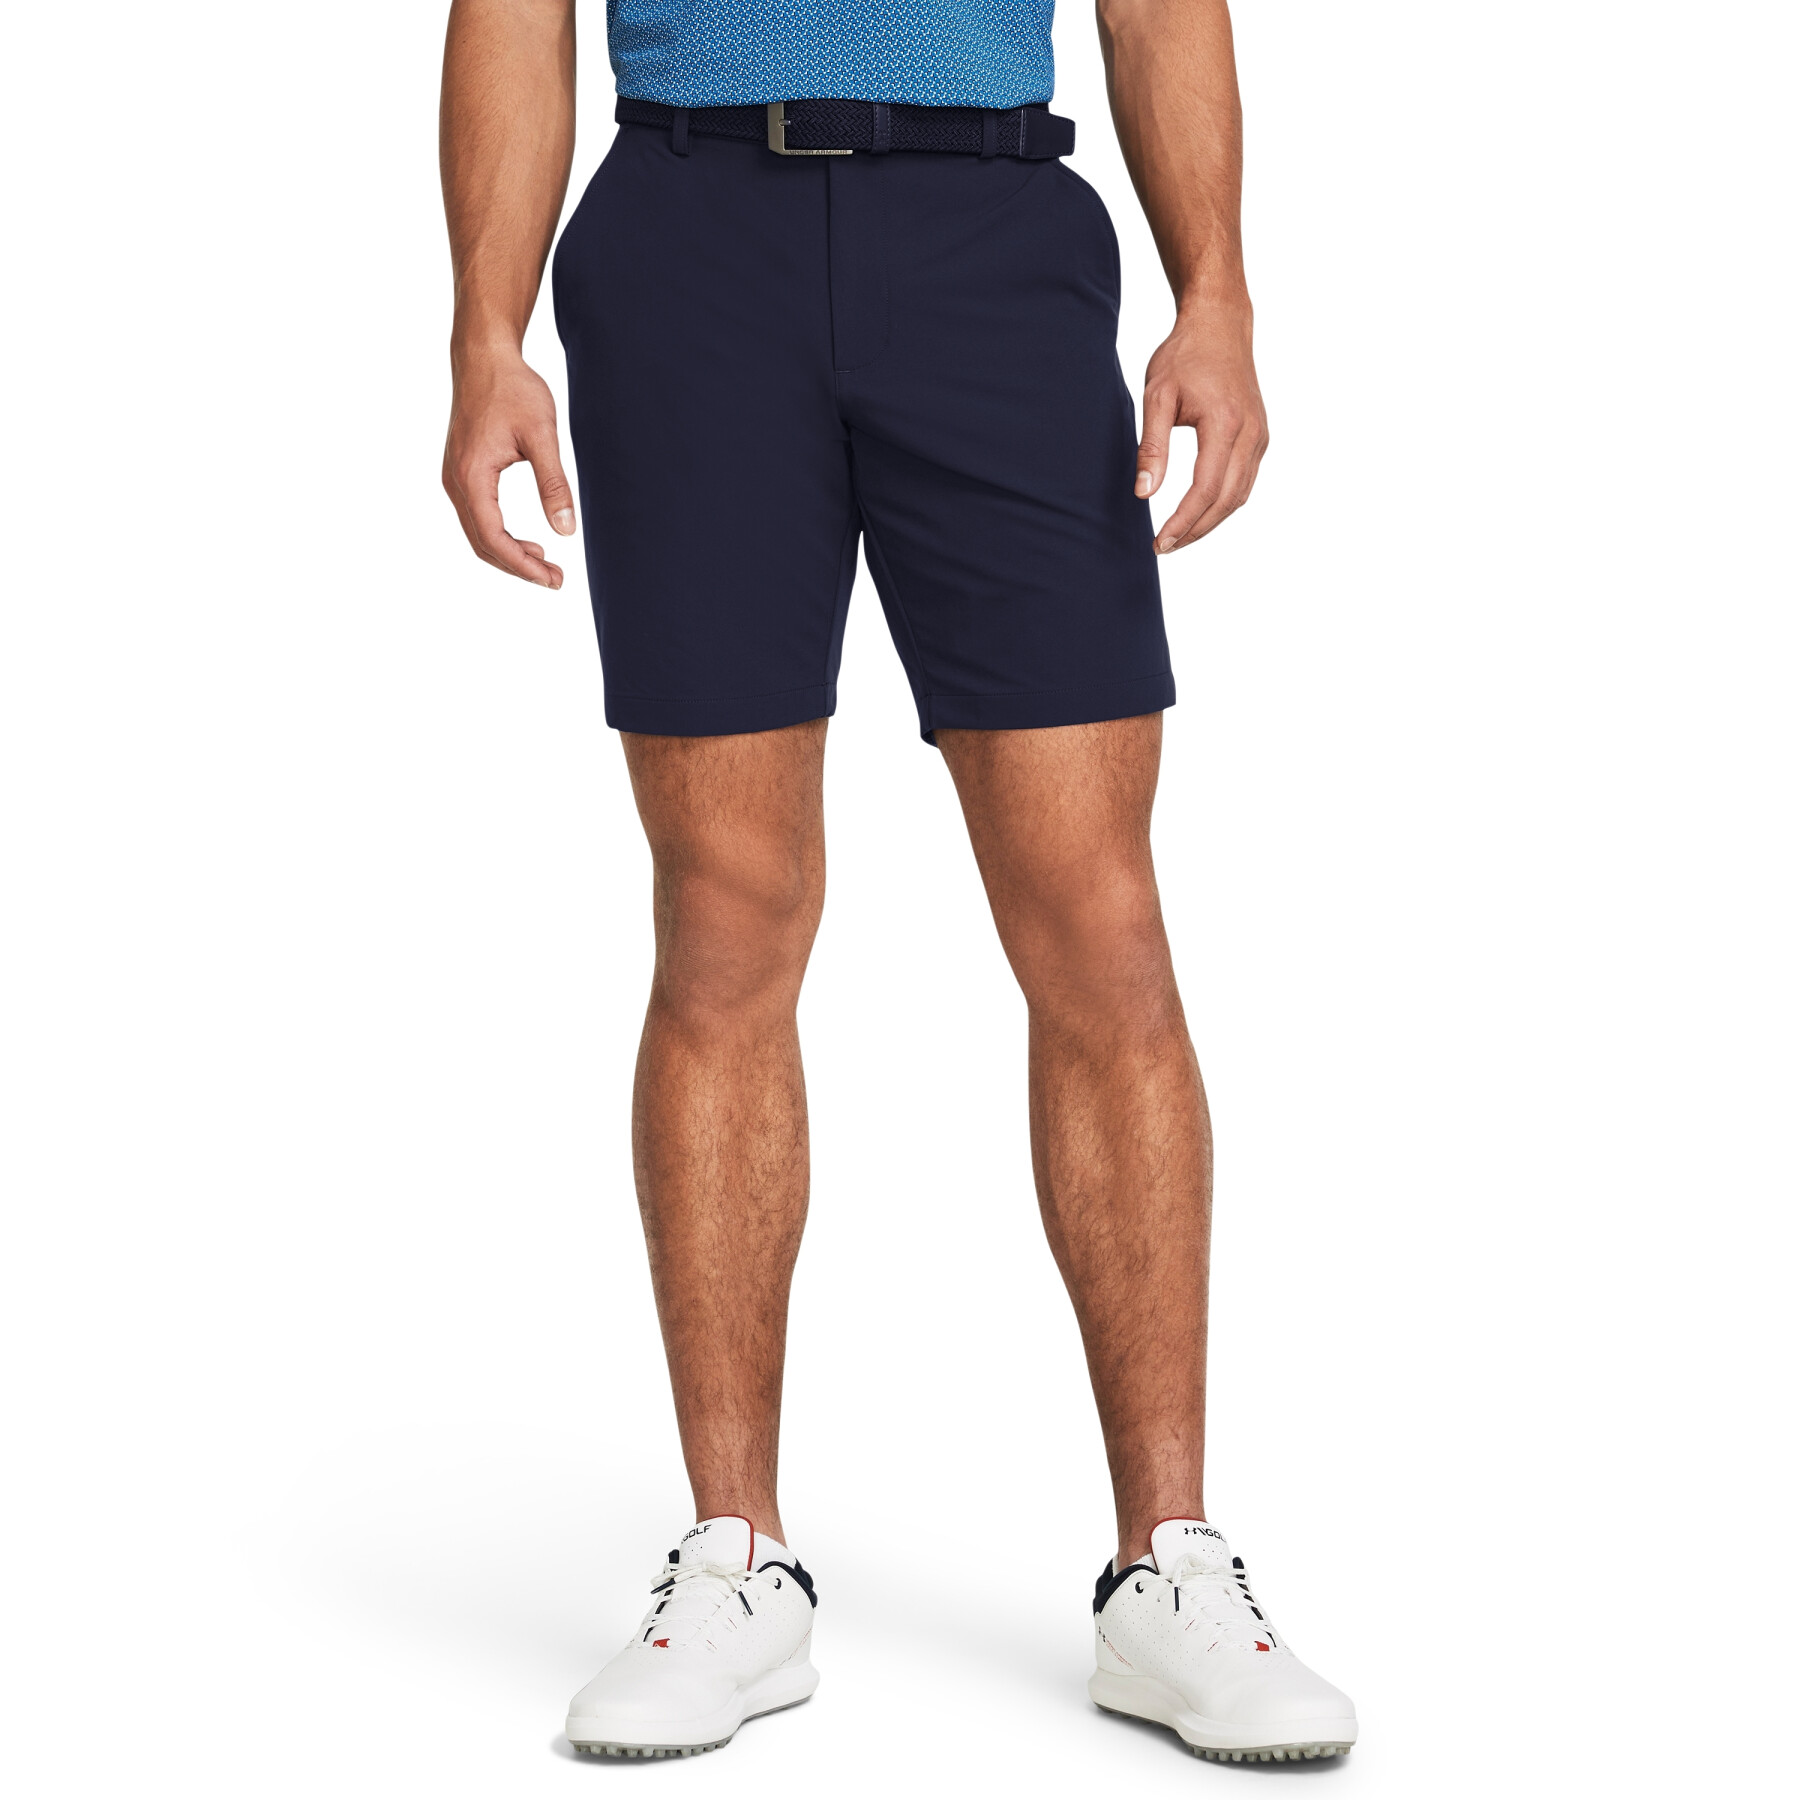 Curta Under Armour Matchplay Tapered